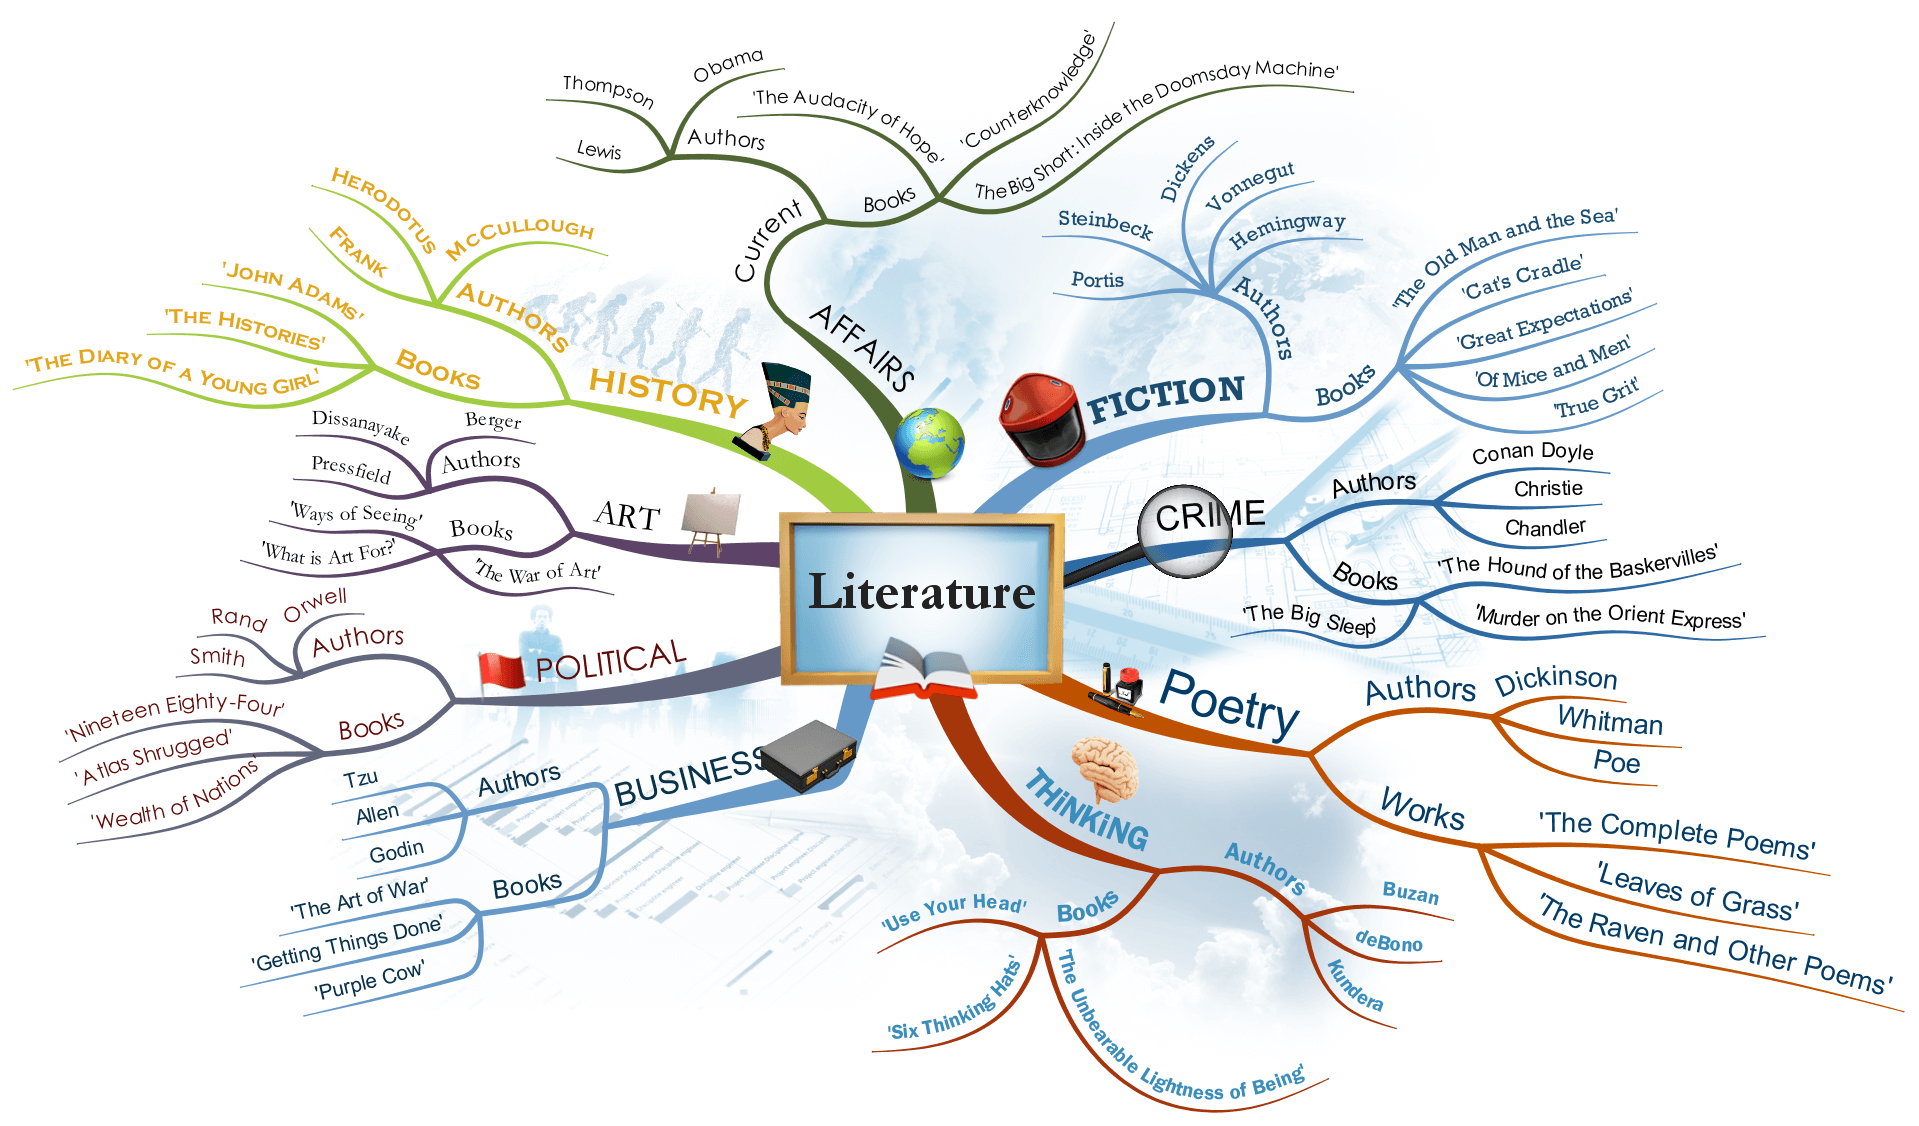 Example of a mind map to help overcome writer's block